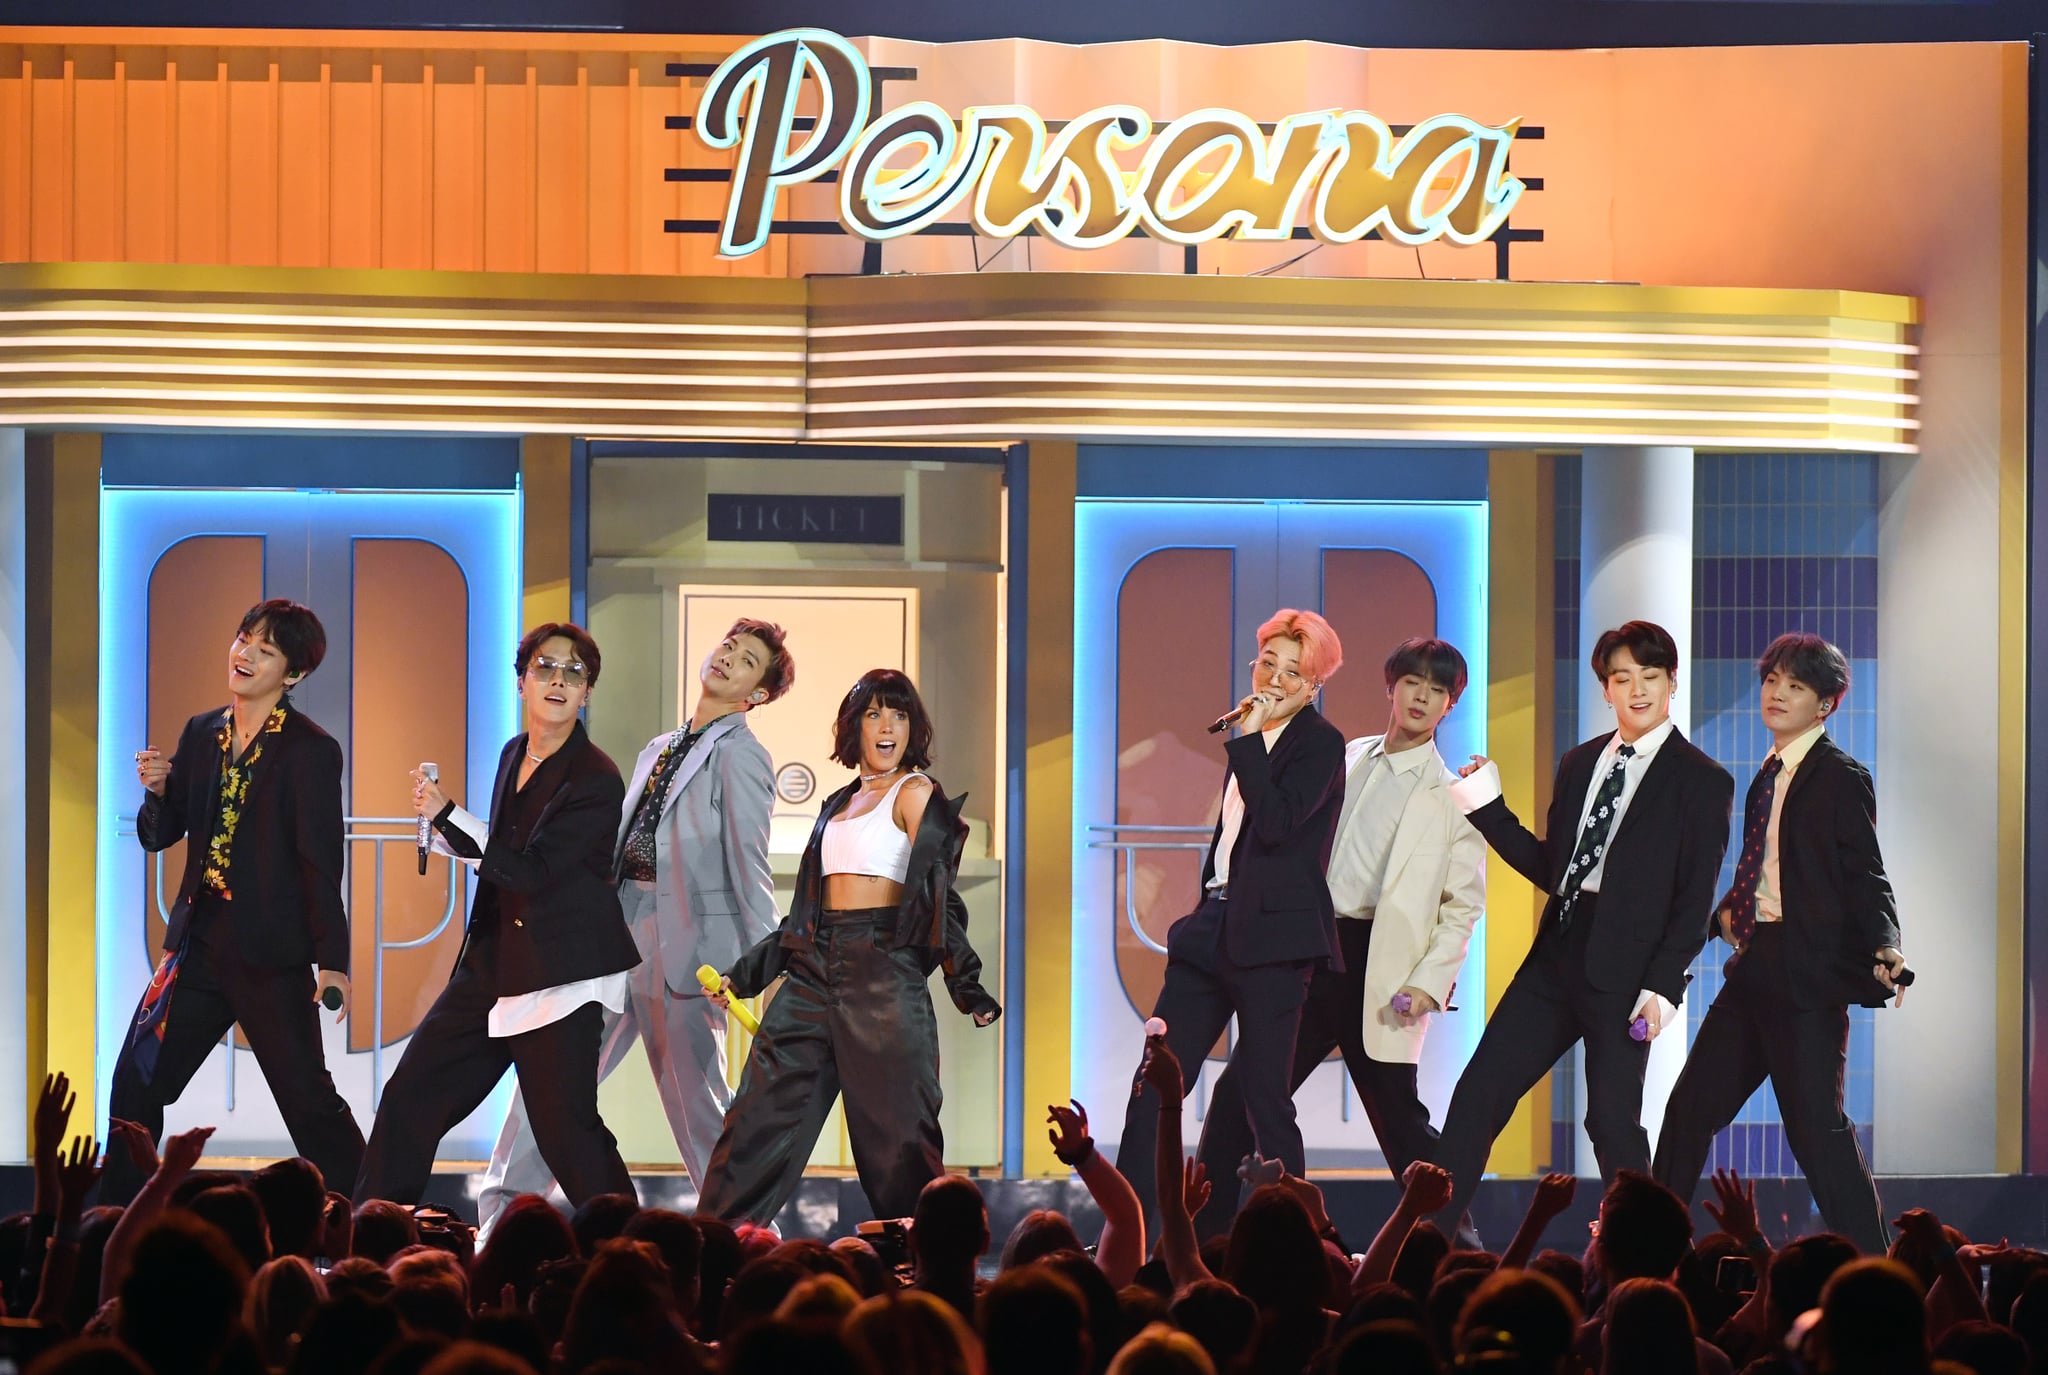 LAS VEGAS, NEVADA - MAY 01:  Halsey (4th L) and BTS perform during the 2019 Billboard Music Awards at MGM Grand Garden Arena on May 1, 2019 in Las Vegas, Nevada.  (Photo by Ethan Miller/Getty Images)